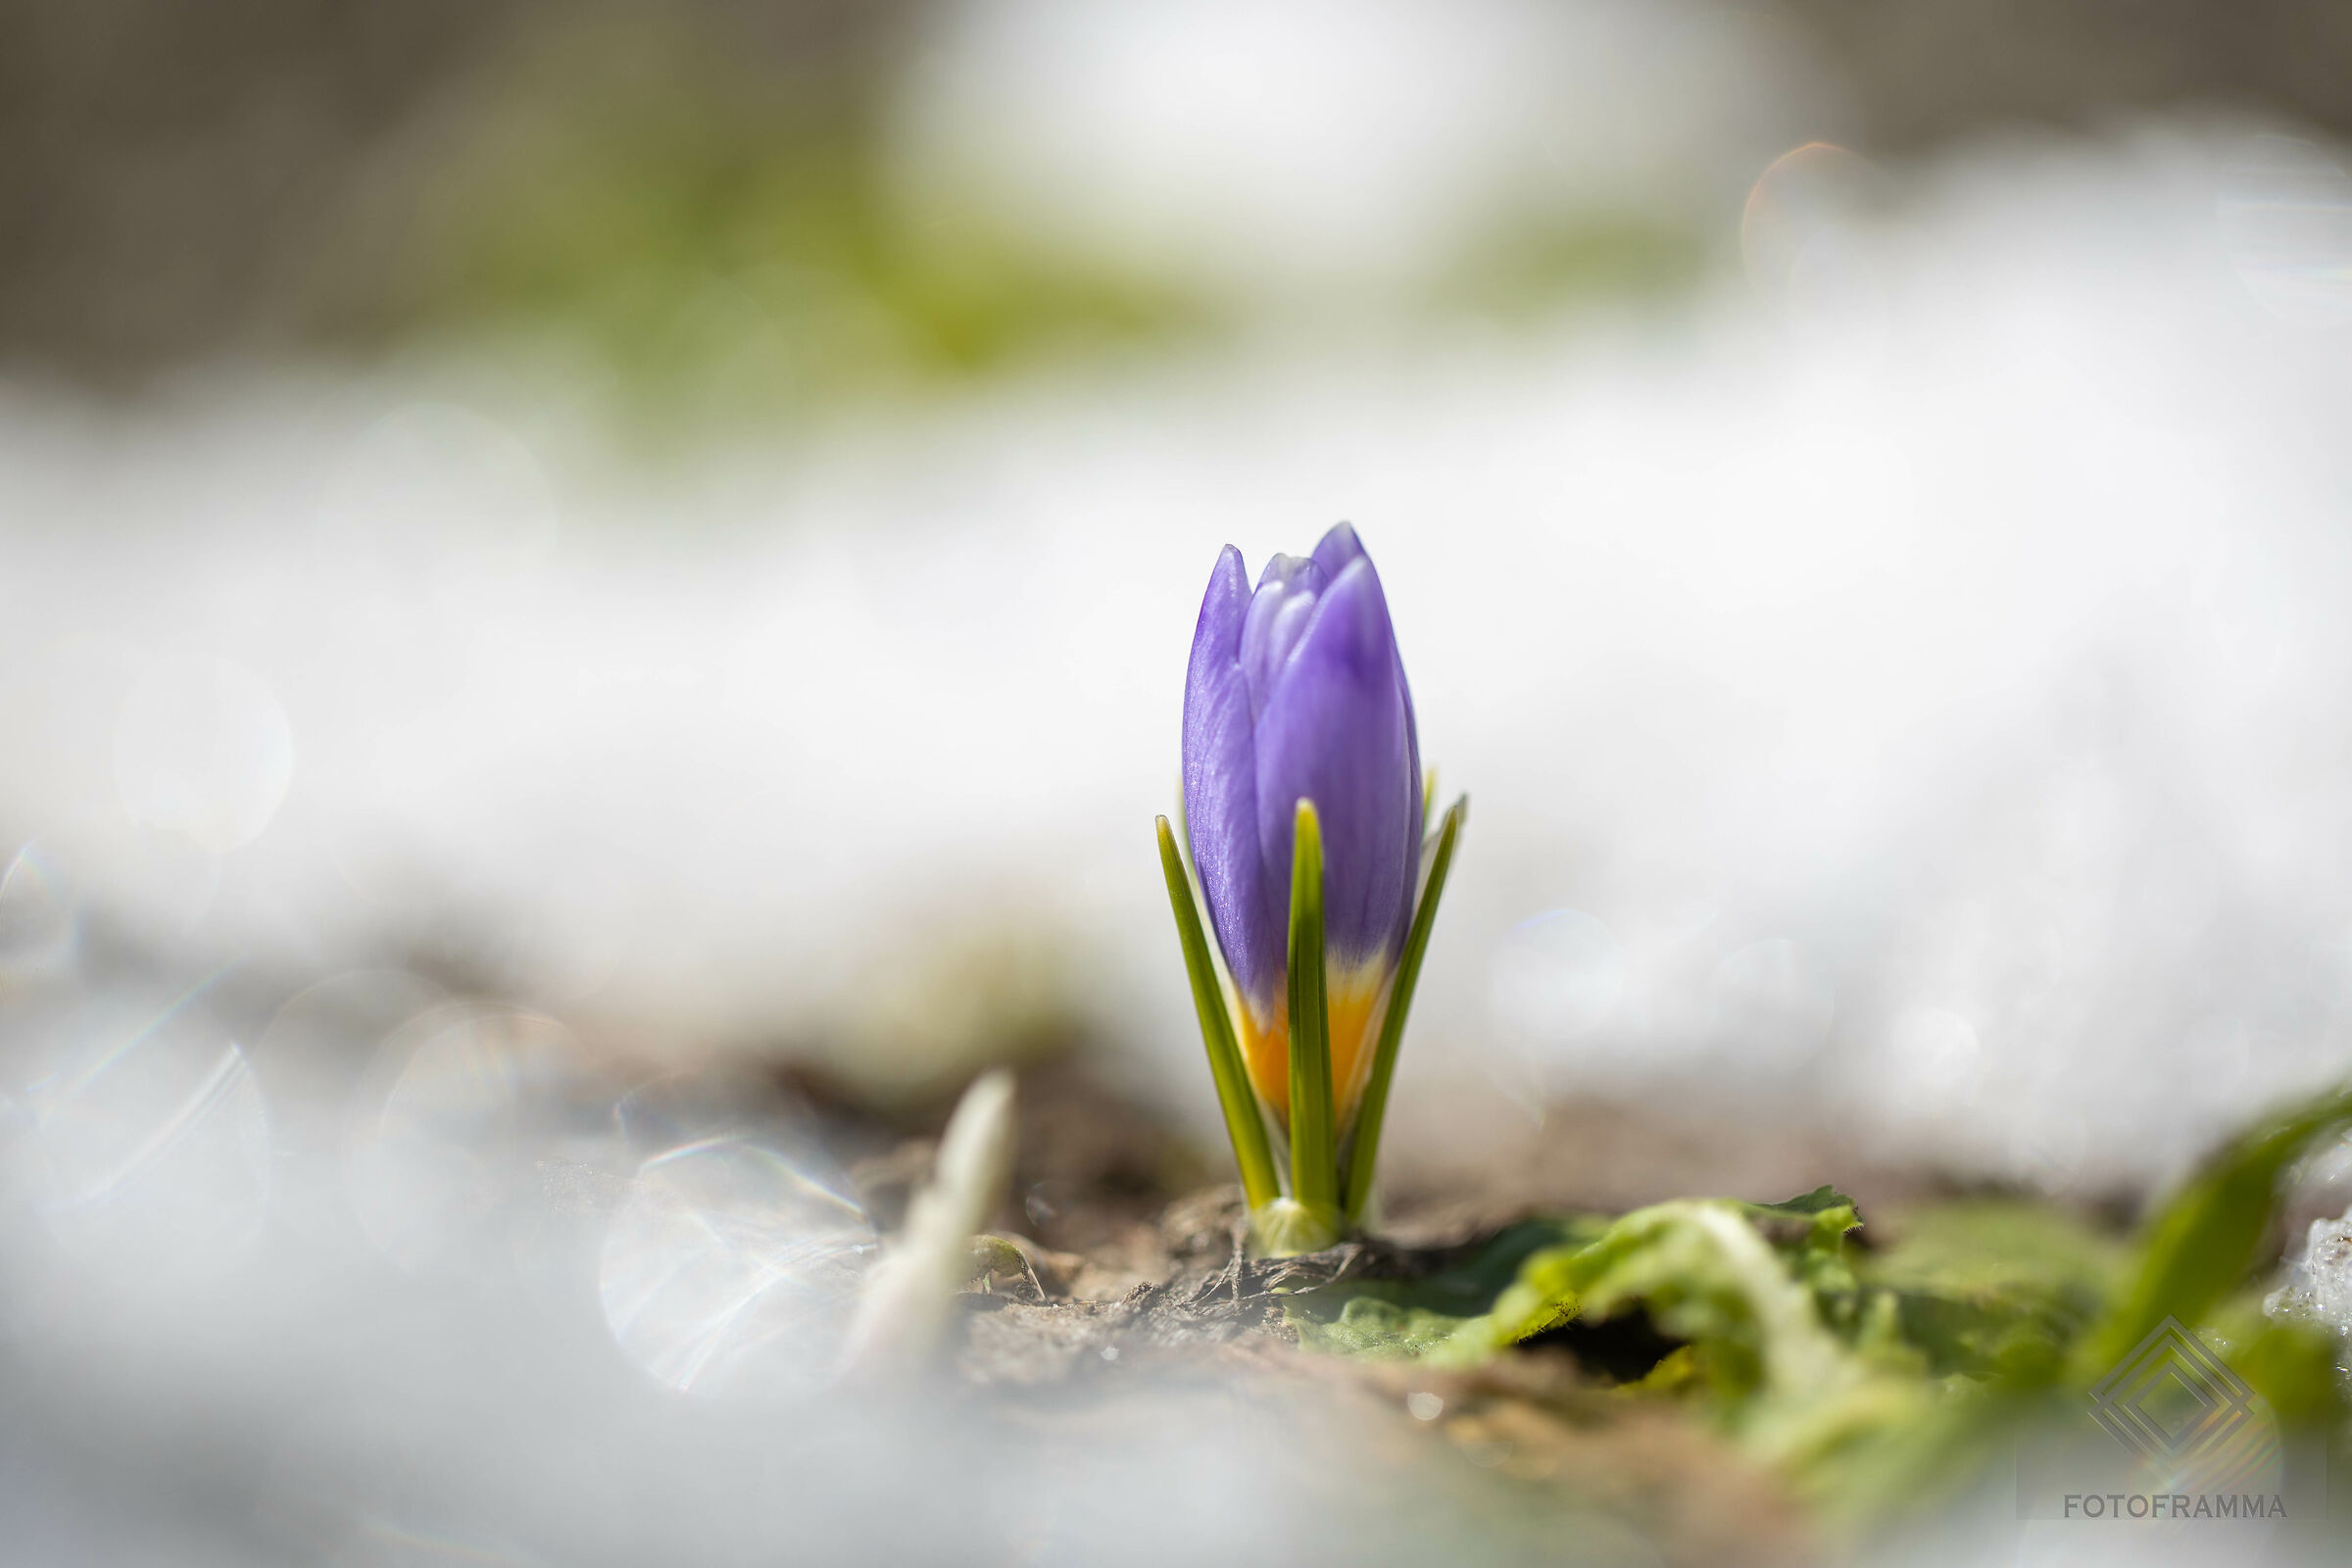 First crocus among the snow that is melting...